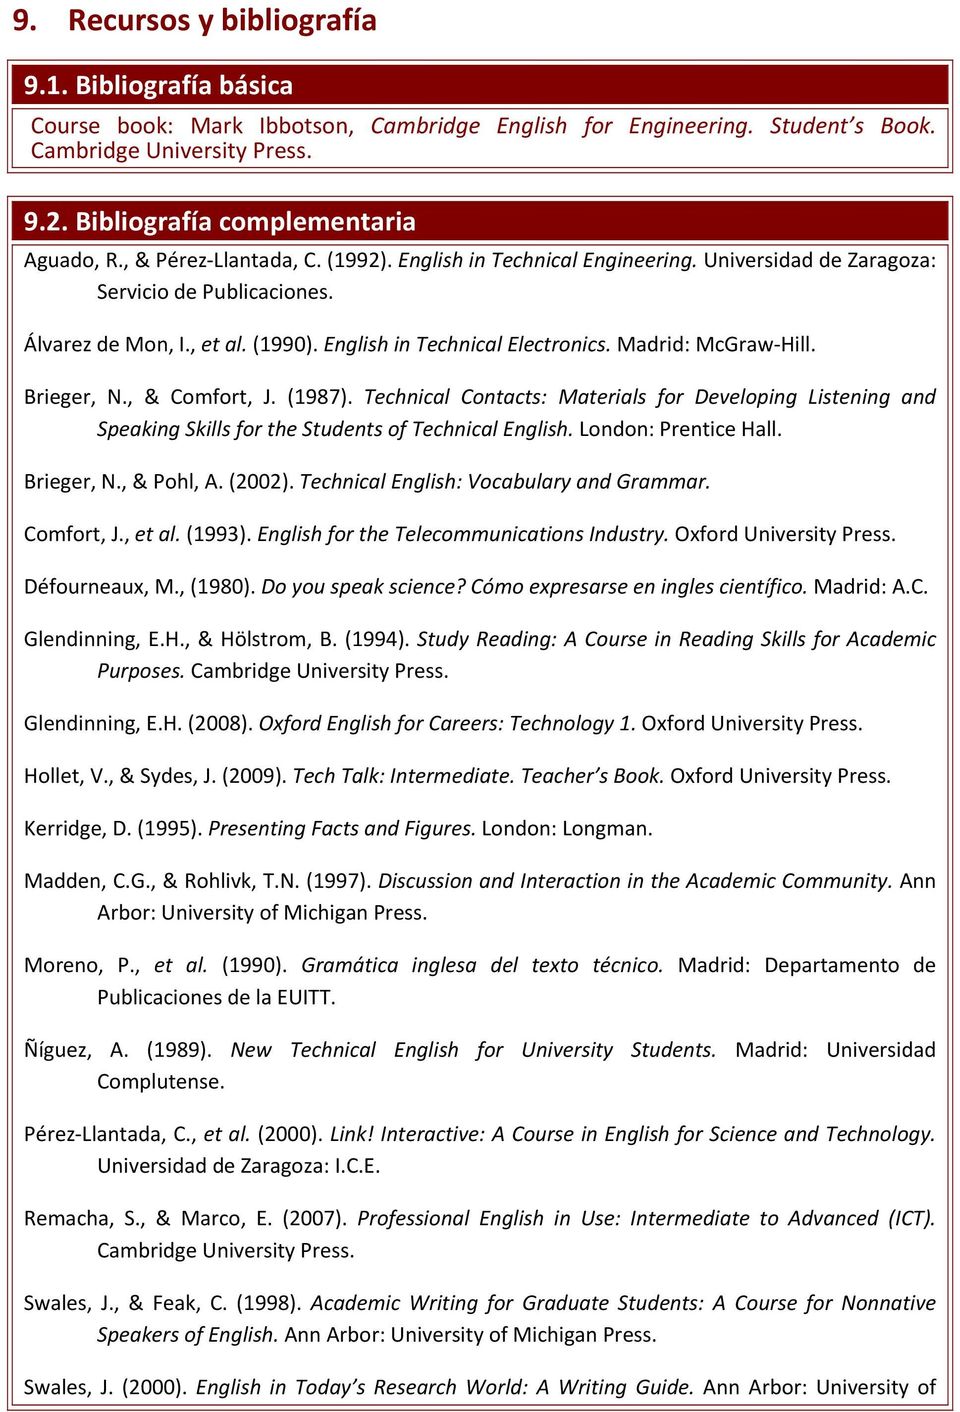 English in Technical Electronics. Madrid: McGraw Hill. Brieger, N., & Comfort, J. (1987).